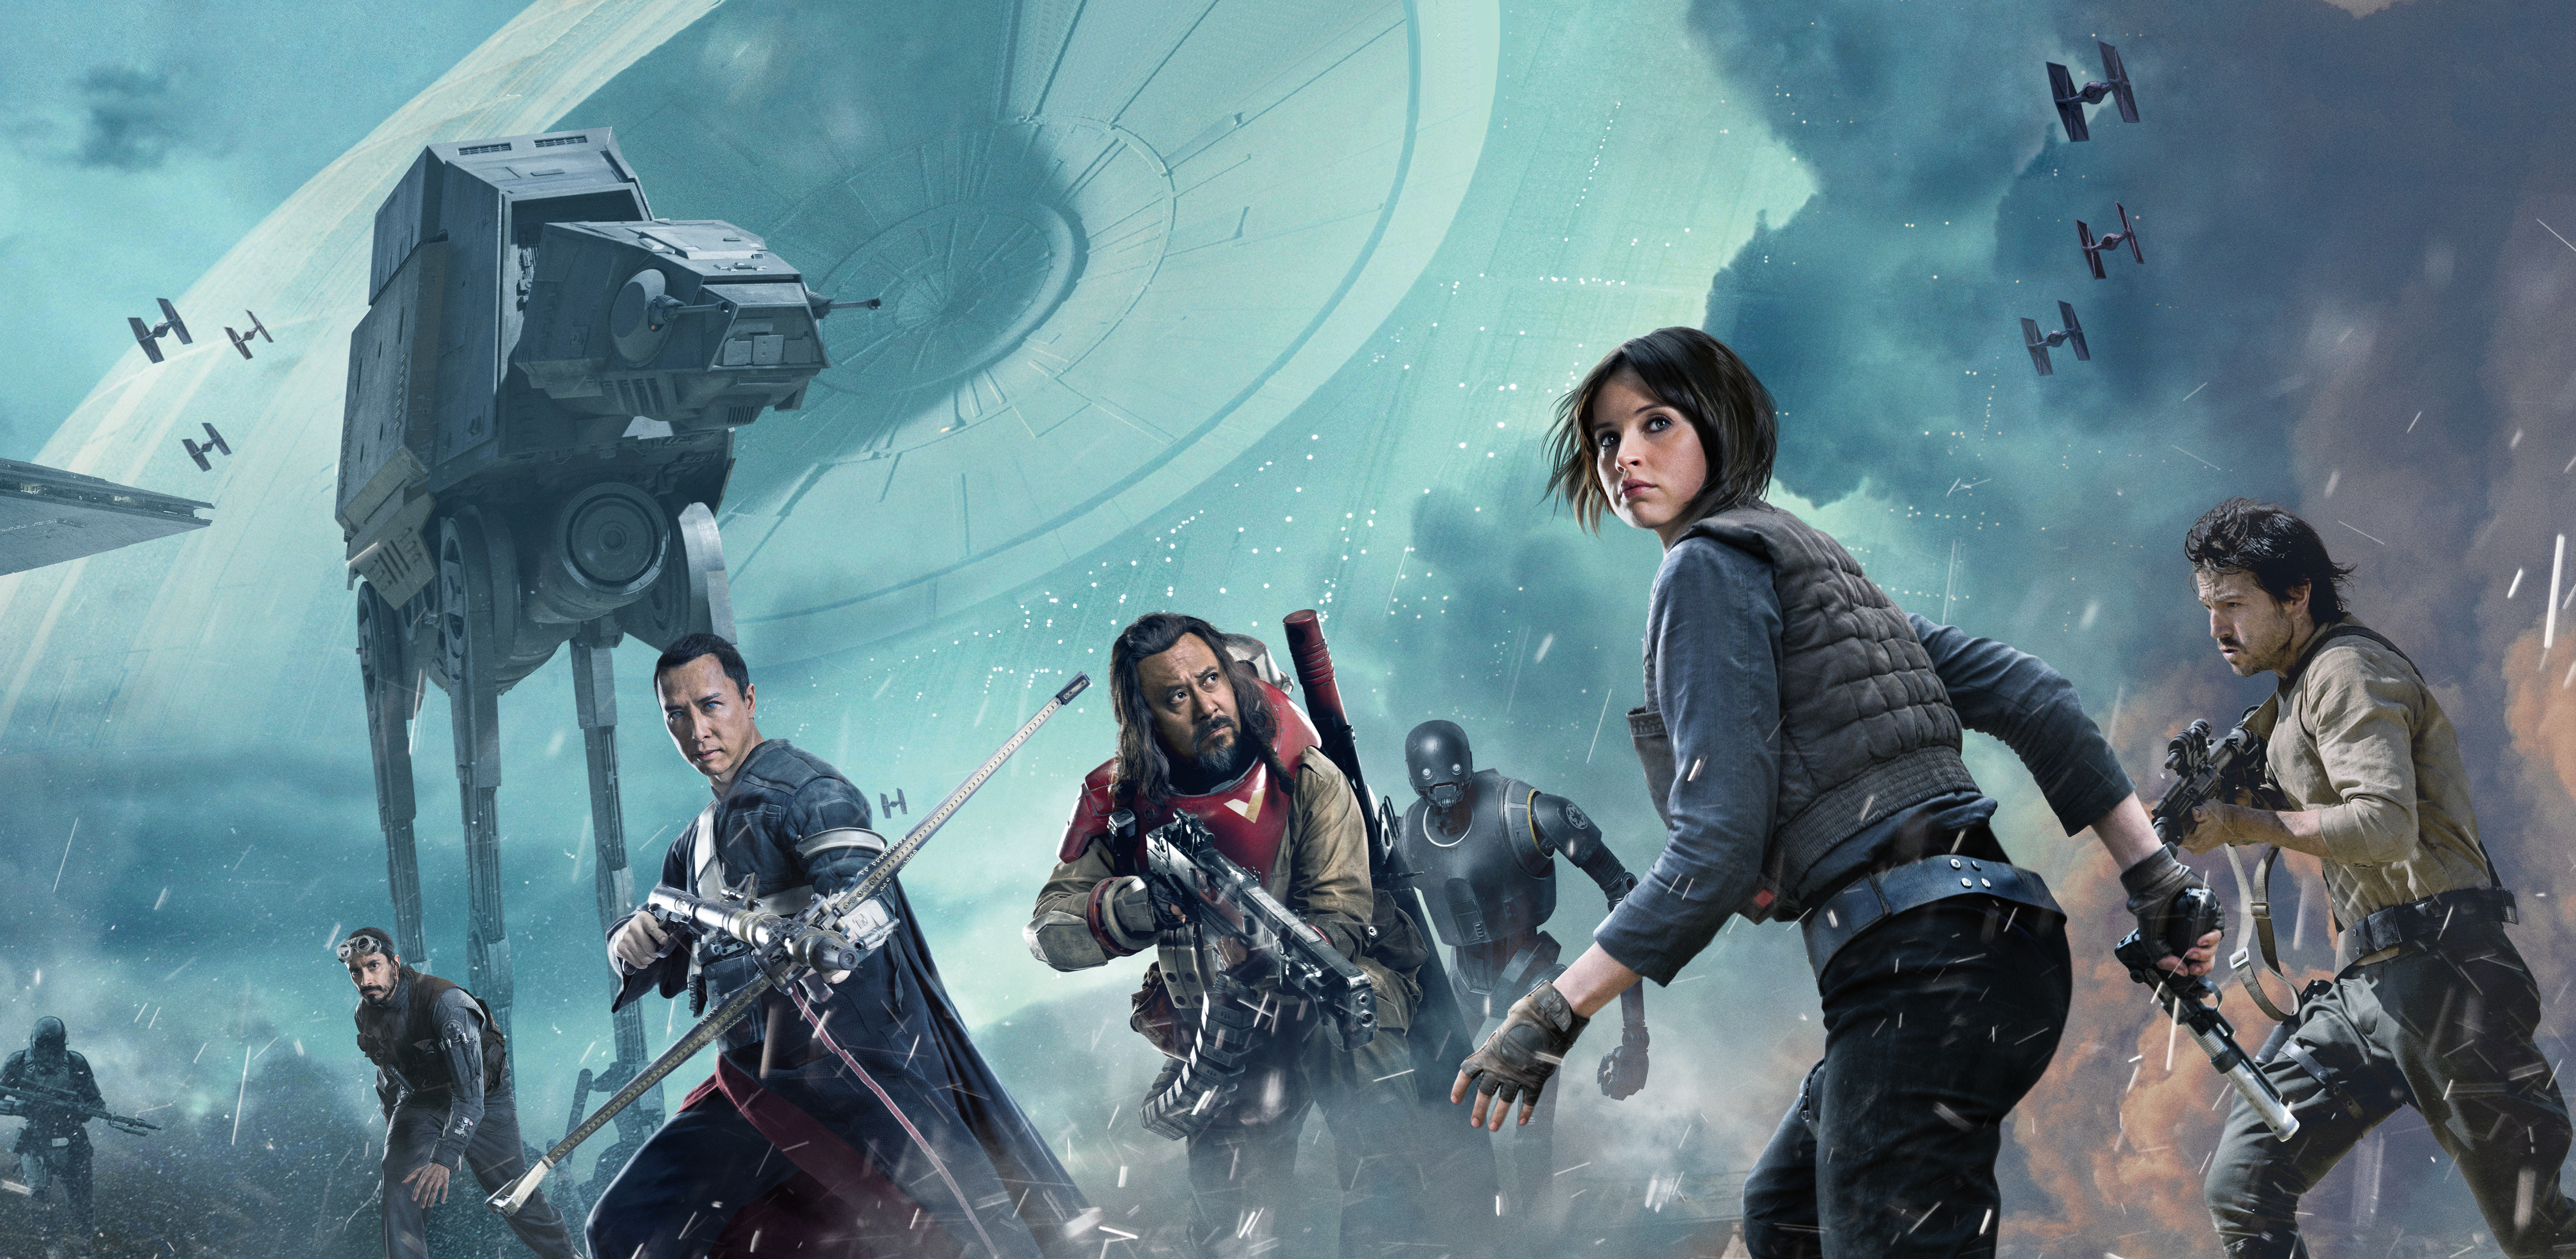 rogue one wallpaper hd,action adventure game,cg artwork,movie,strategy video game,action film